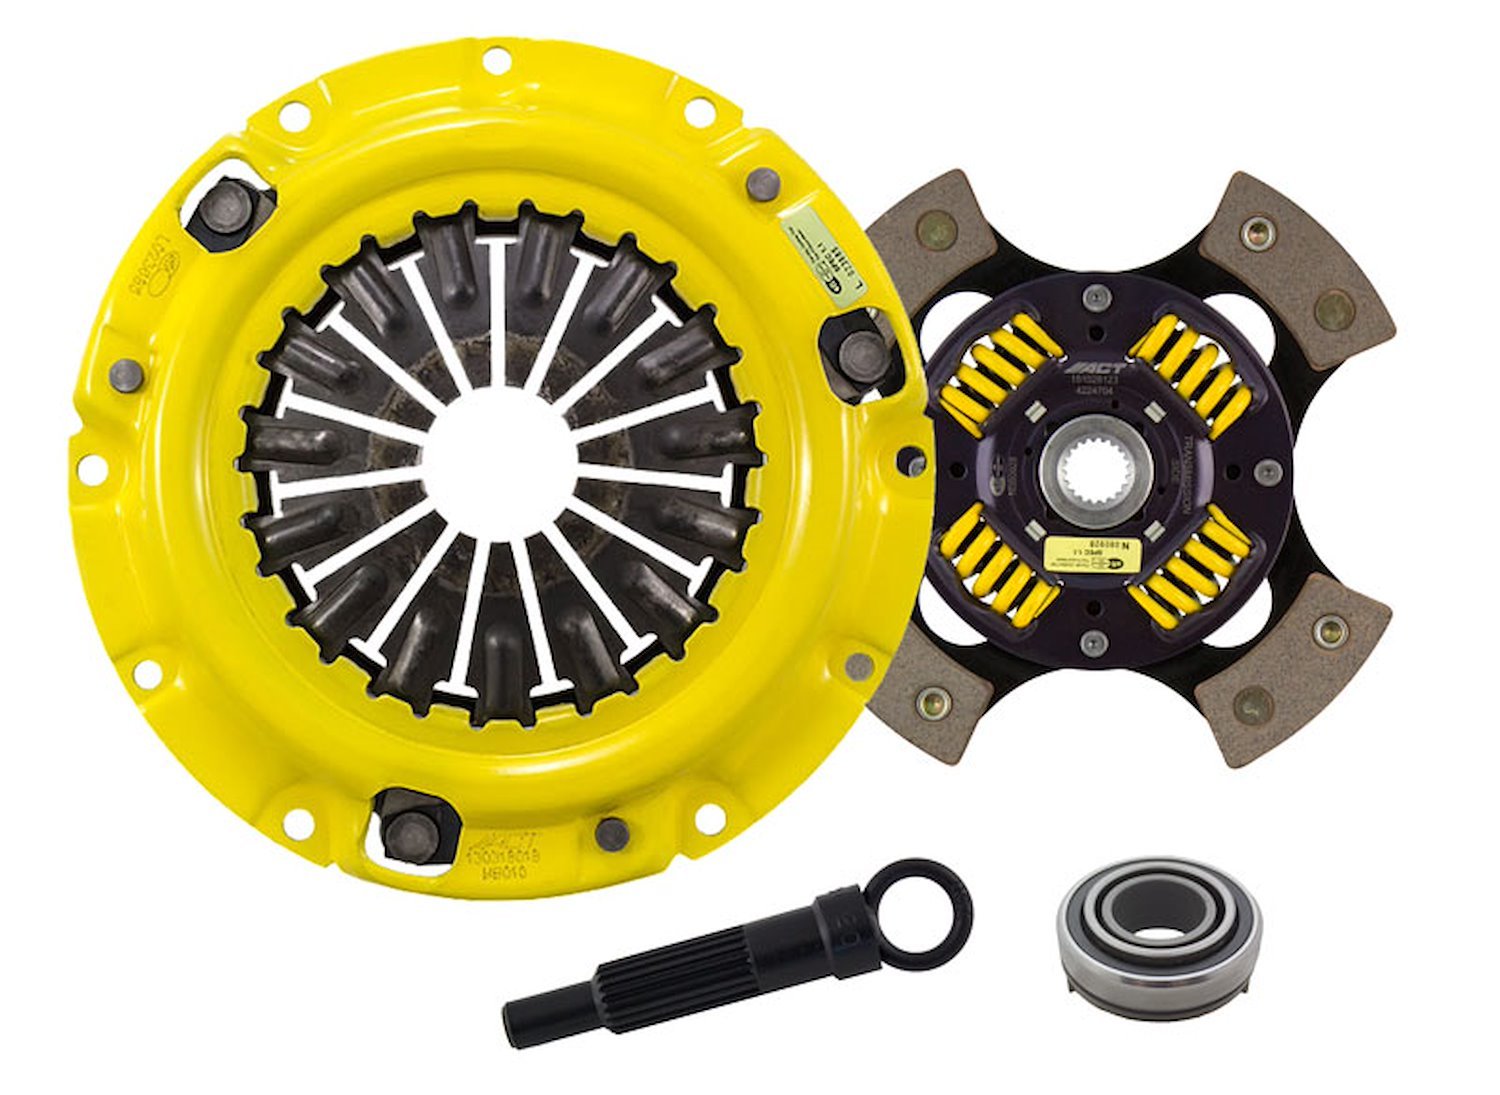 HD/Race Sprung 4-Pad Transmission Clutch Kit Fits Select Chrysler/Dodge/Eagle/Mitsubishi/Plymouth